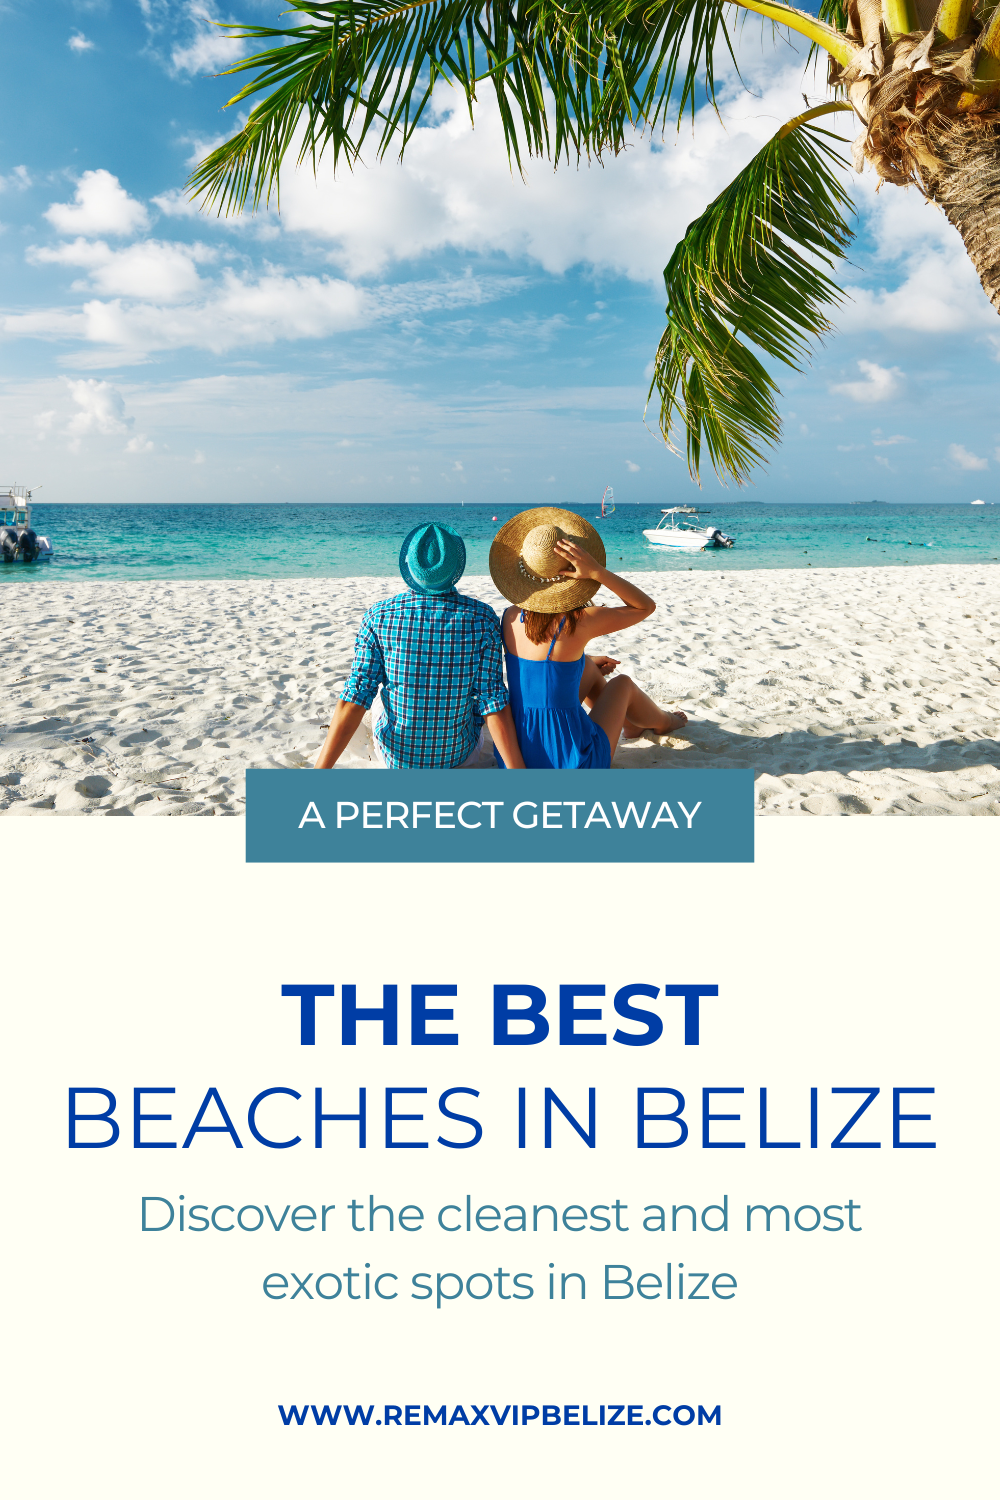 We have created the definite list of best beaches in Belize. Read on and plan your next Belize Vacation!